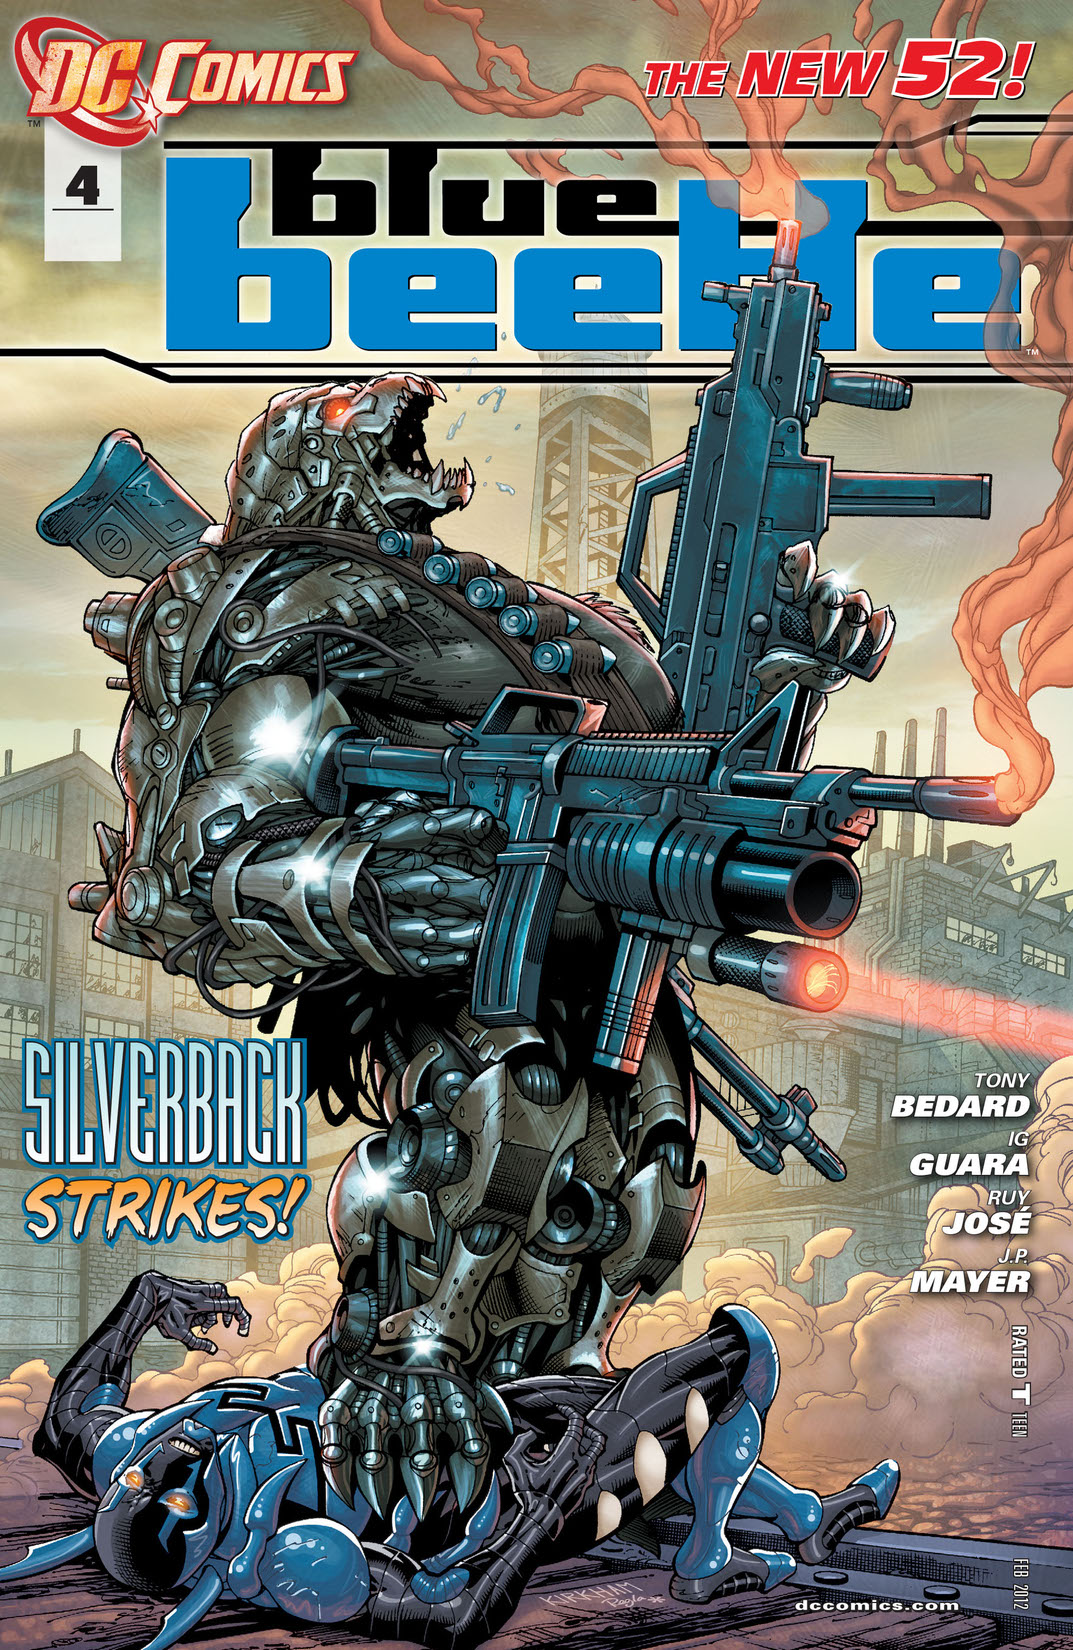 Blue Beetle (2011-) #4 preview images